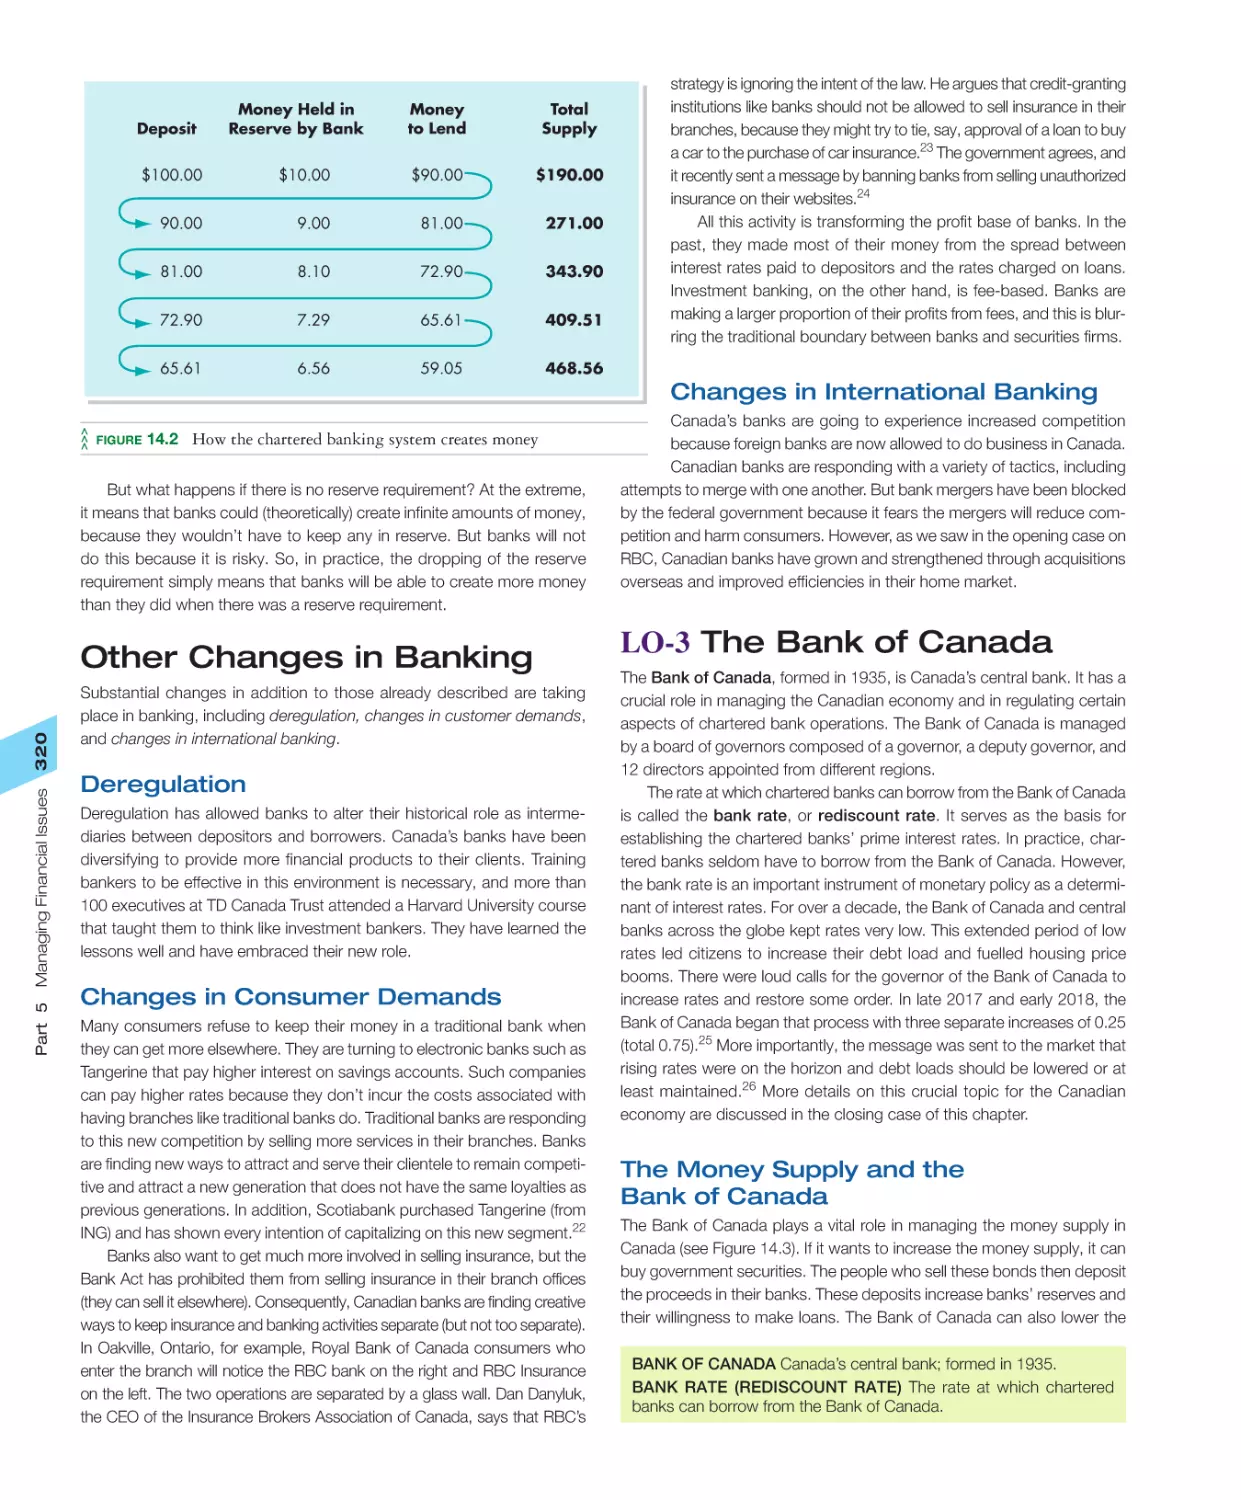 Other Changes in Banking
LO‐3 The Bank of Canada